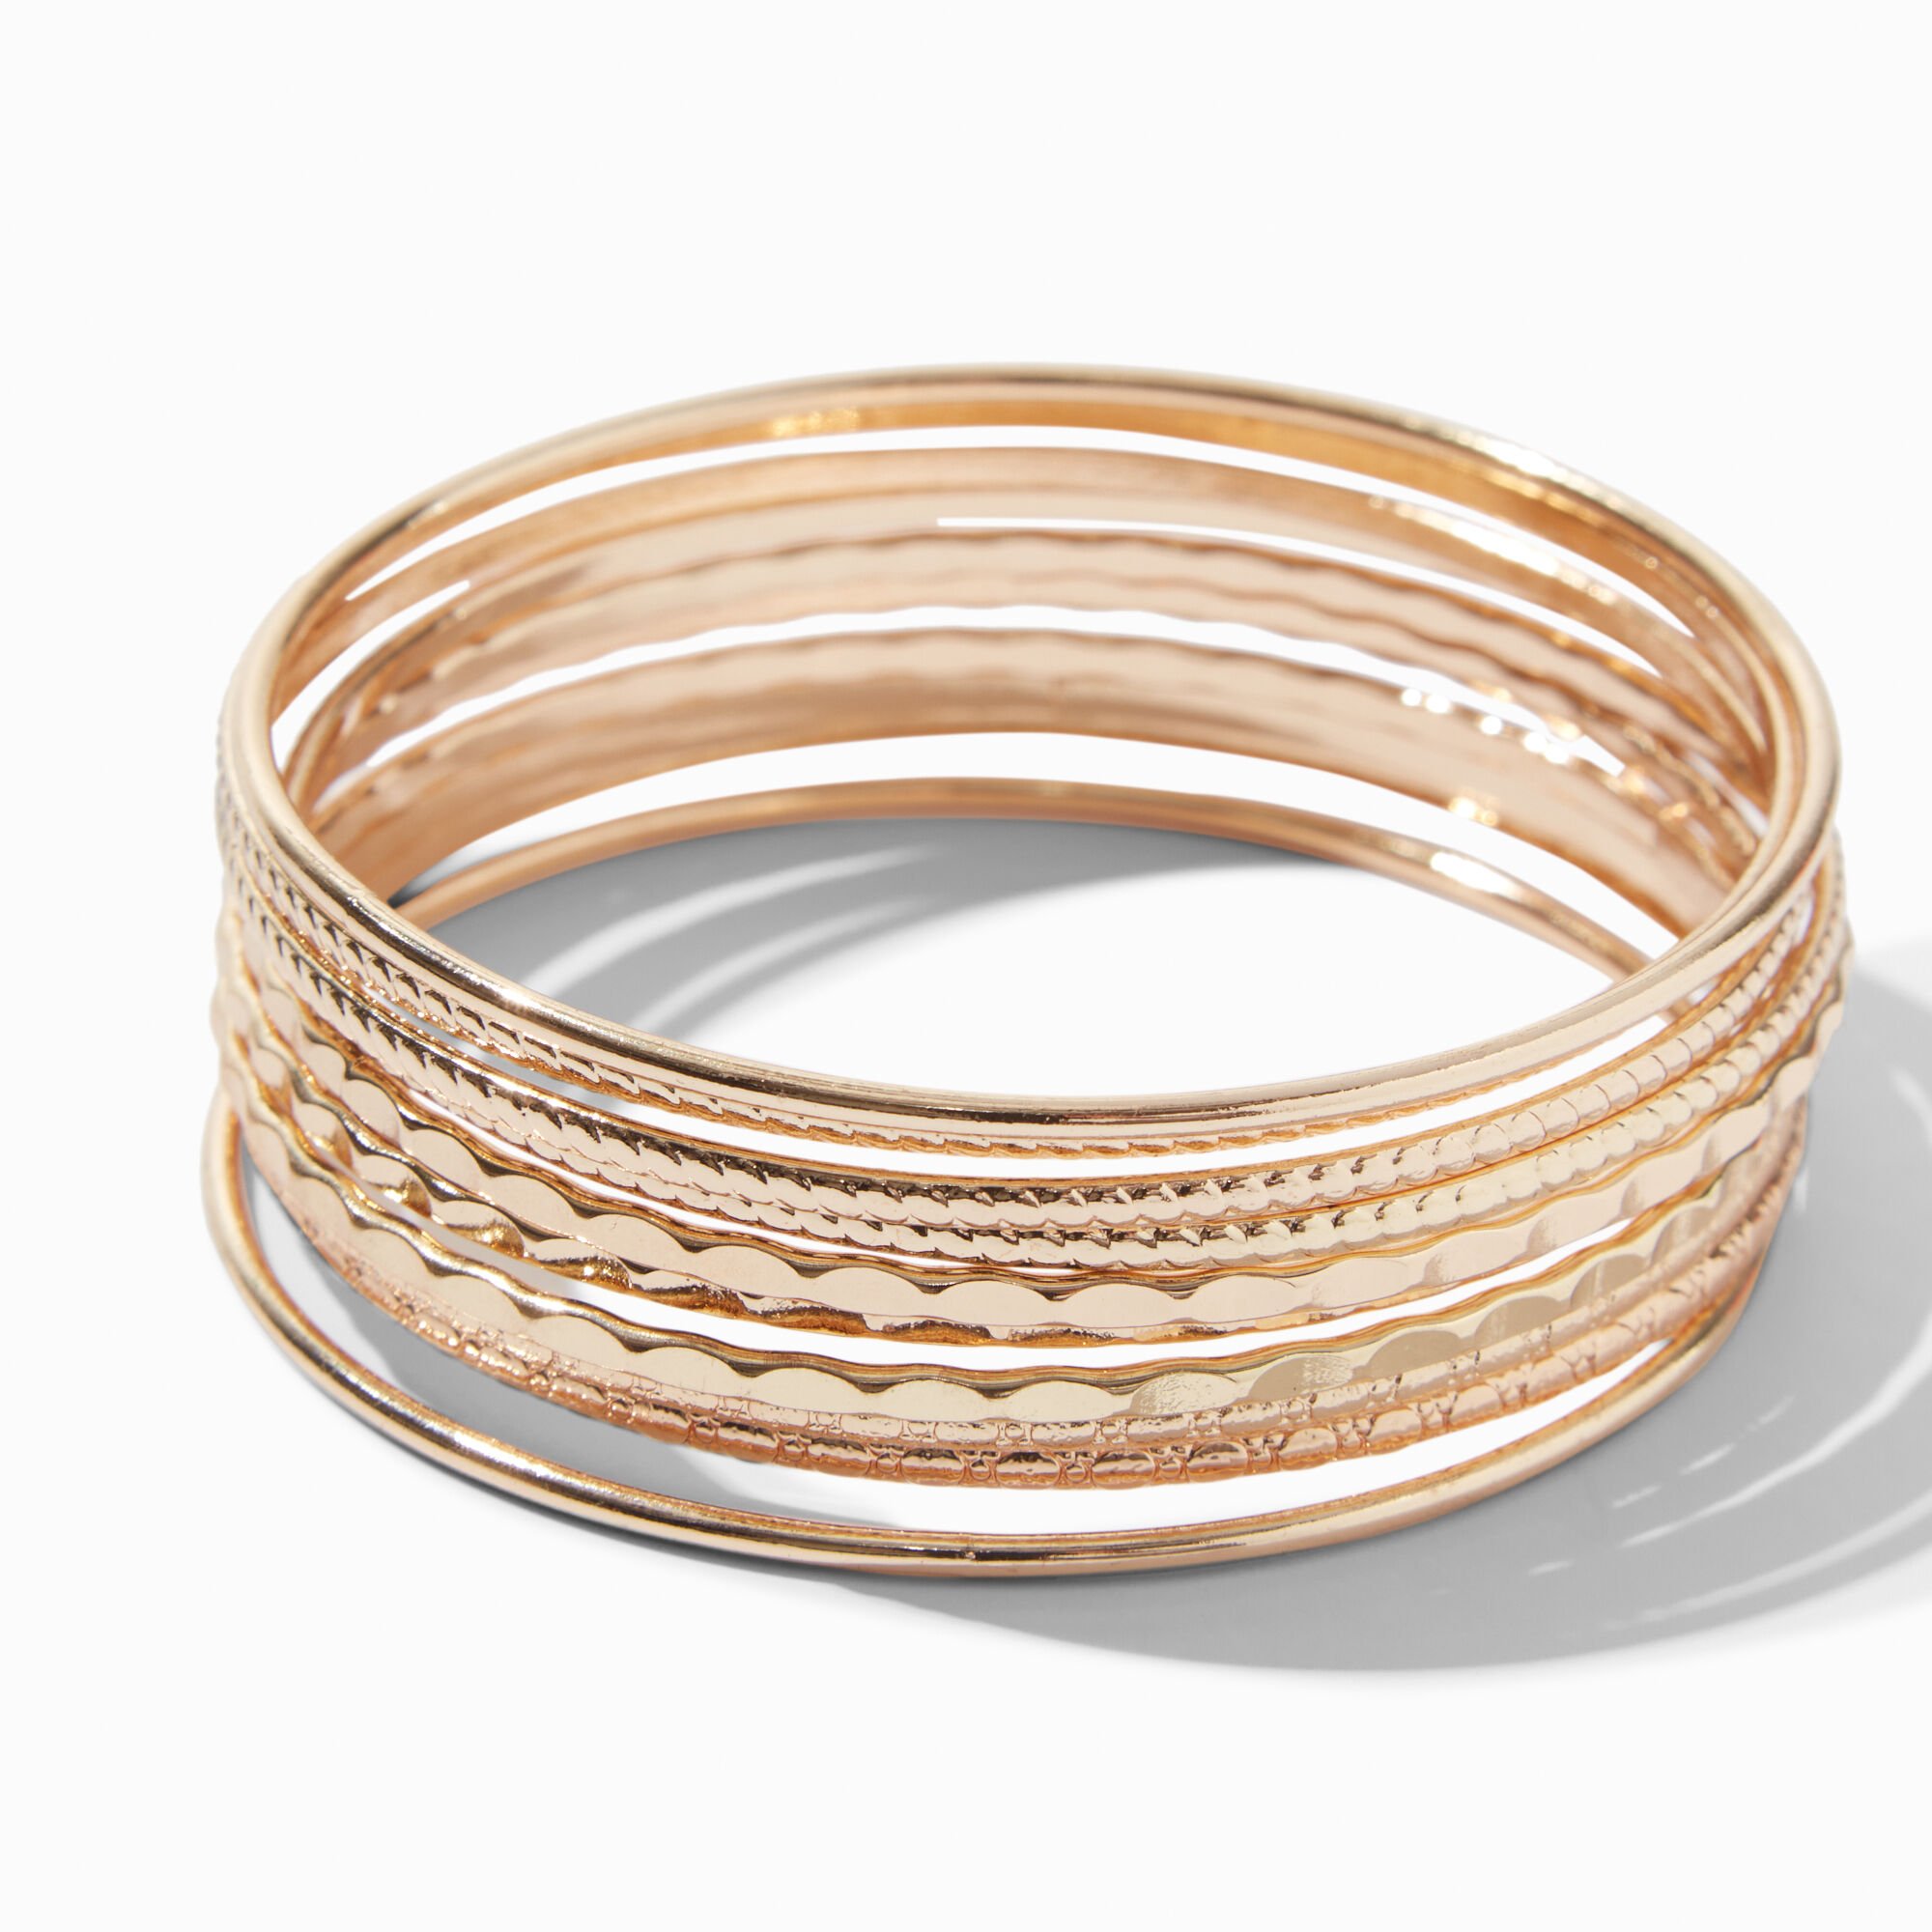 View Claires Tone Textured Bangle Bracelets 10 Pack Gold information